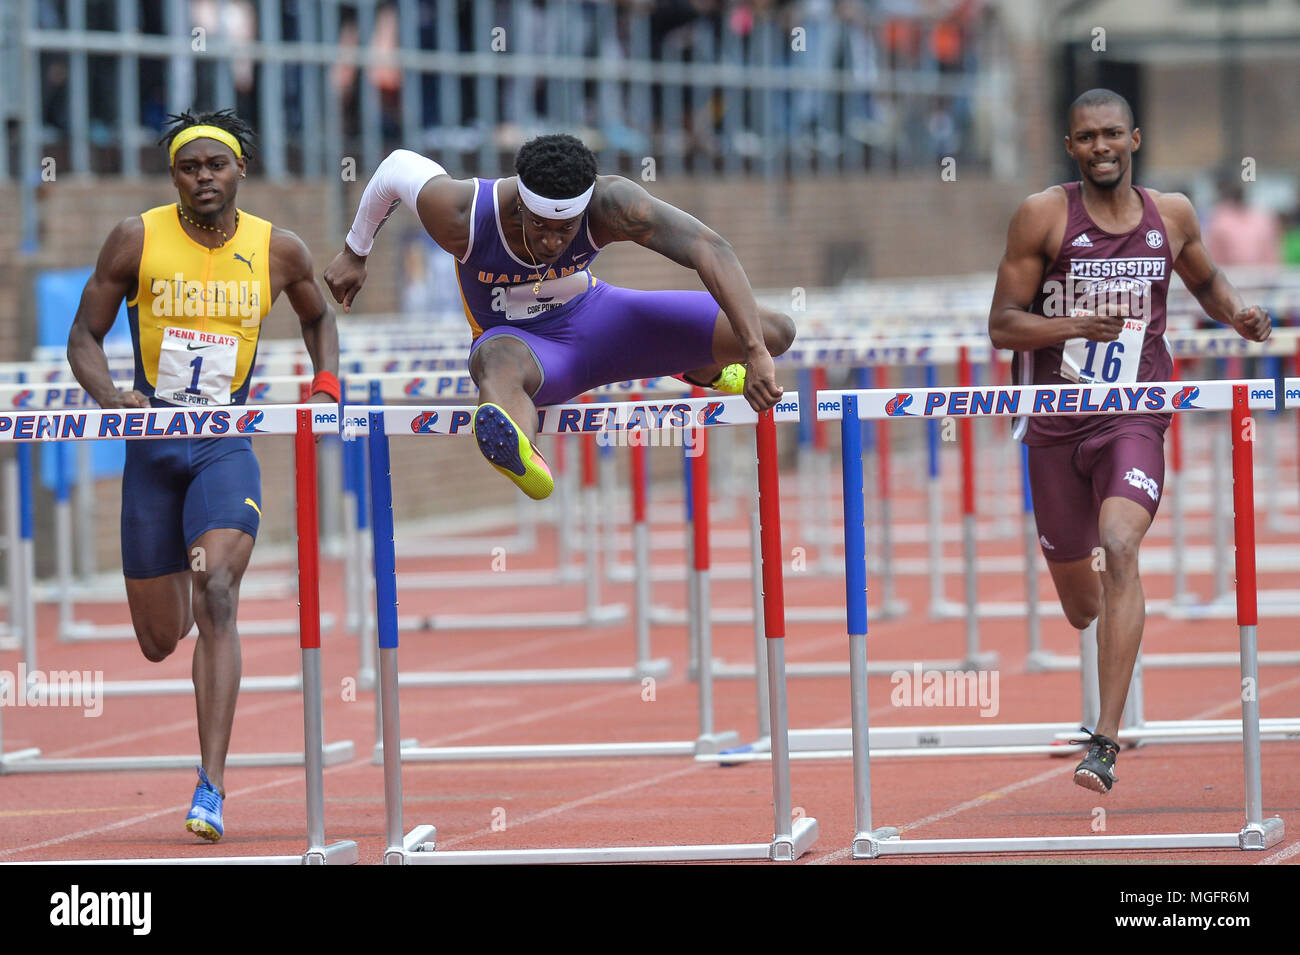 Philadelphia, Pennsylvania, USA. 27th Apr, 2018. ROHAN COLE (1), SIDNEY GIBBONS (8), and HERBERT WISE III (16) compete in the College Men's Shuttle Hurdles 4x110m at Franklin Field in Philadelphia, Pennsylvania. Credit: Amy Sanderson/ZUMA Wire/Alamy Live News Stock Photo